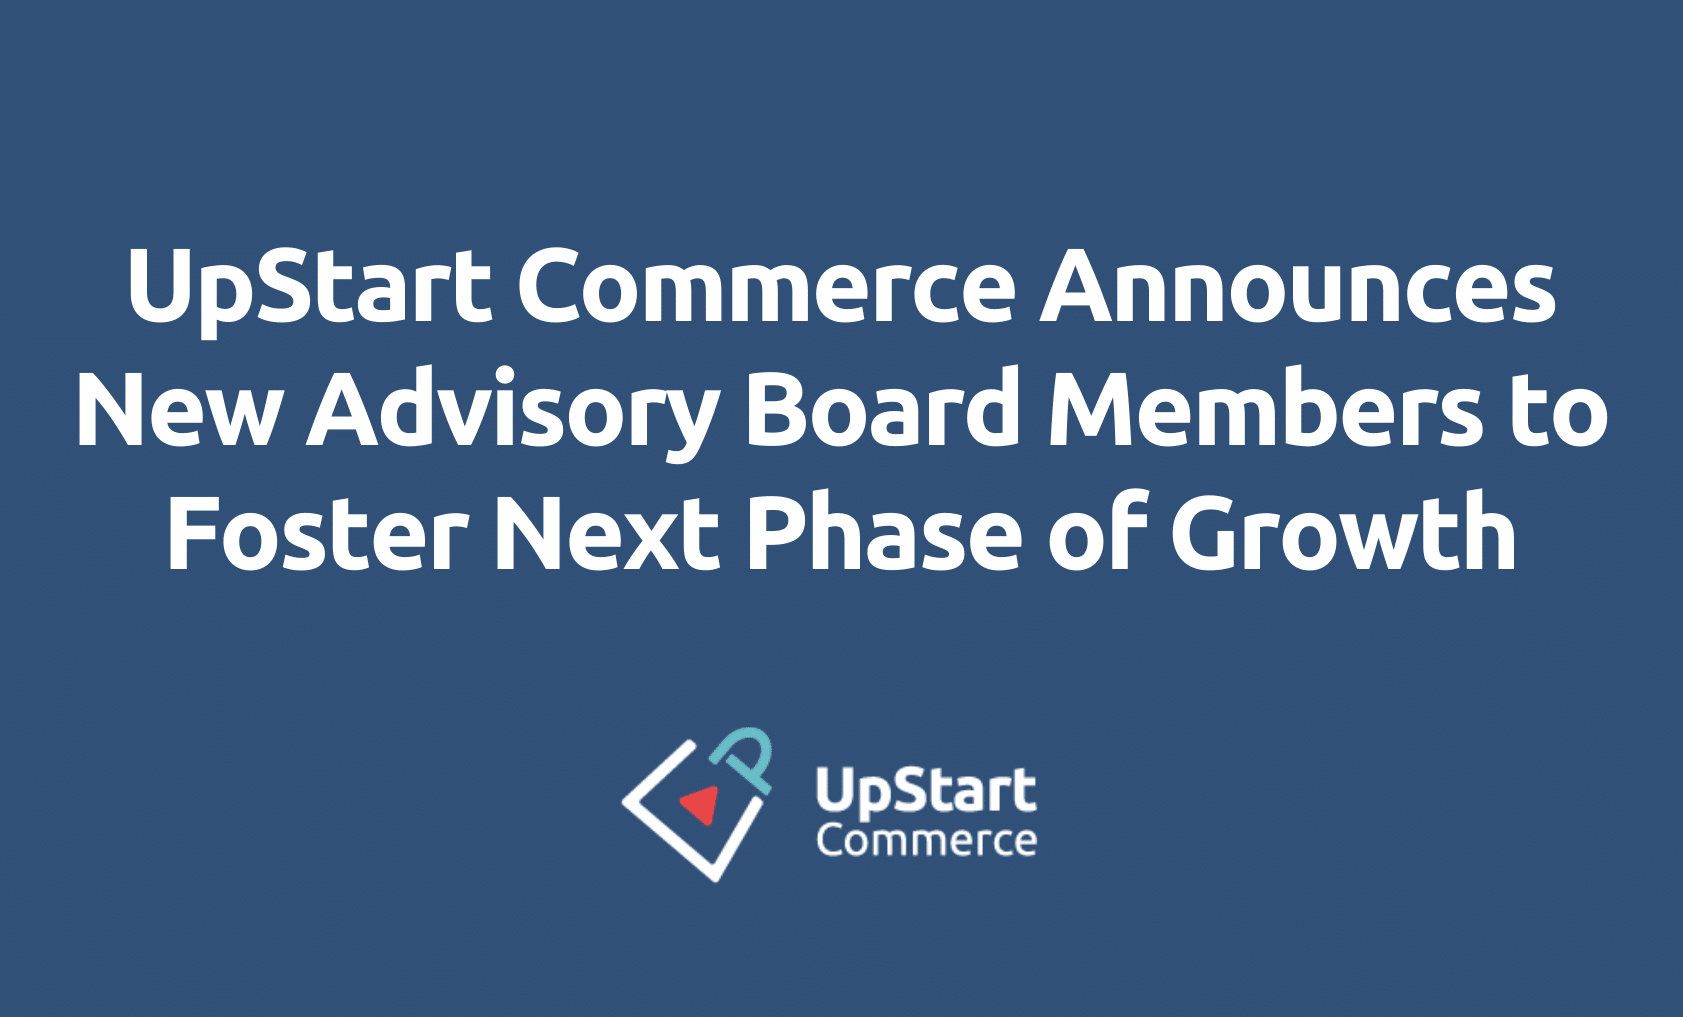 UpStart Commerce Announces New Advisory Board Members to Foster Next Phase of Growth